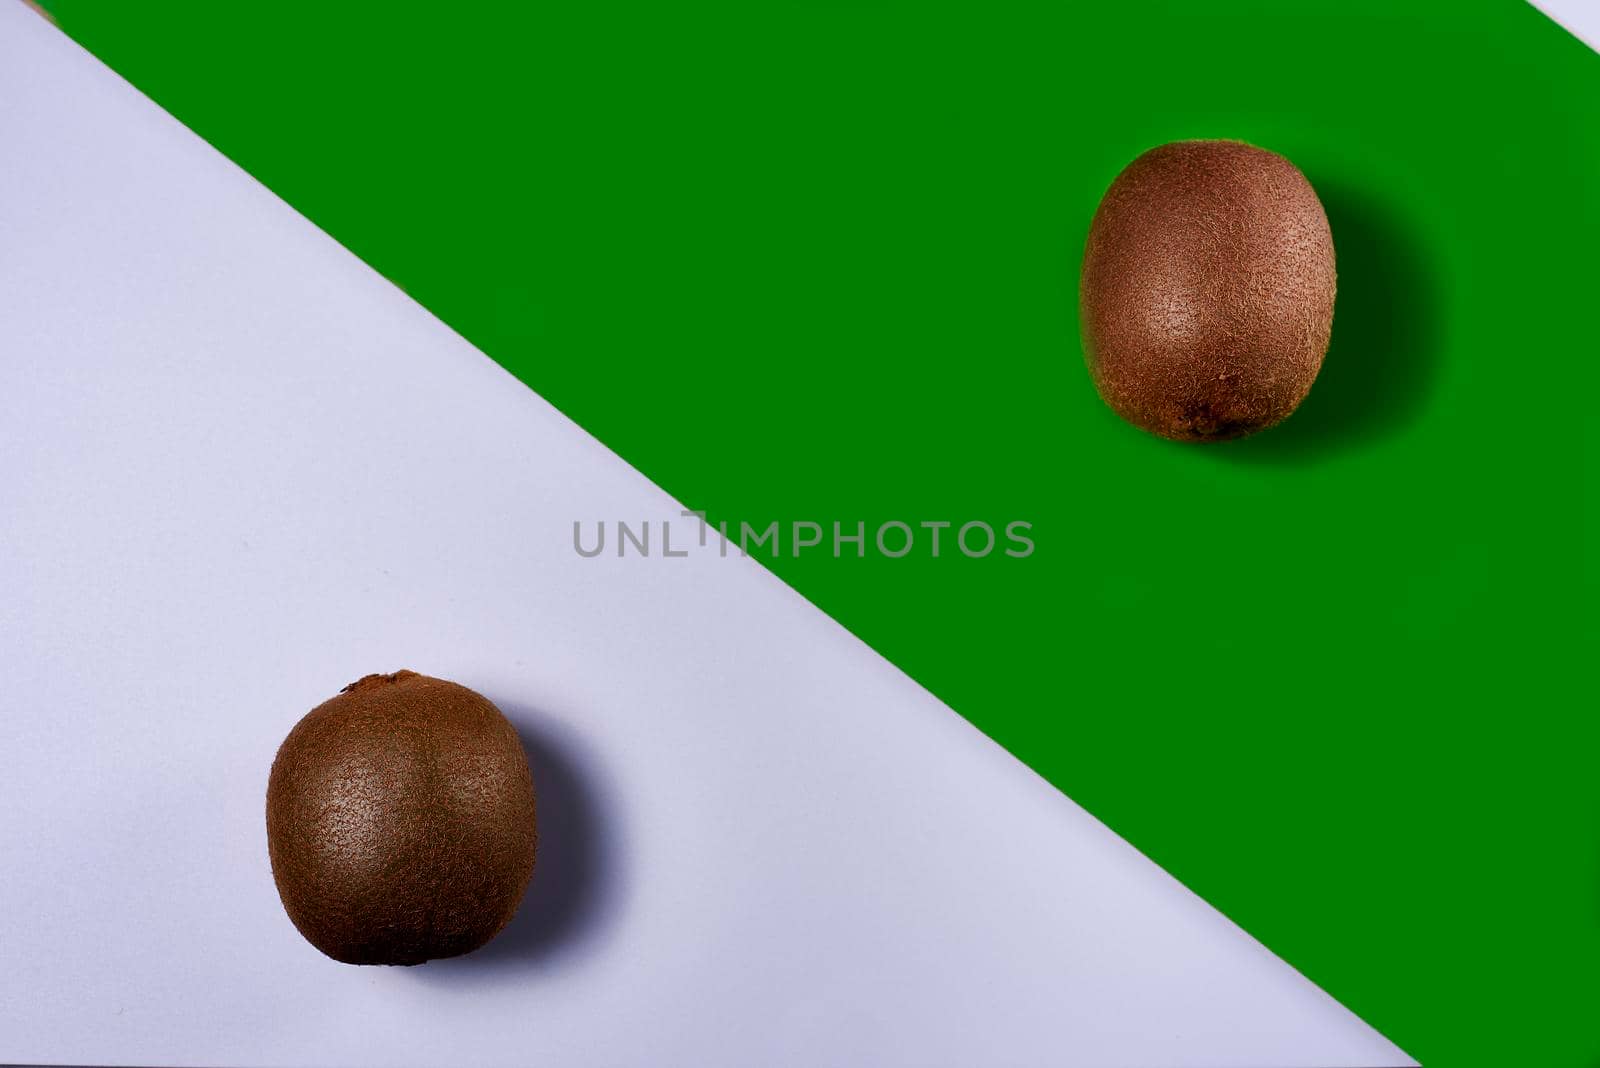 Two kiwis on white and green ground. Smooth background, symmetrical, straight lines, luminous